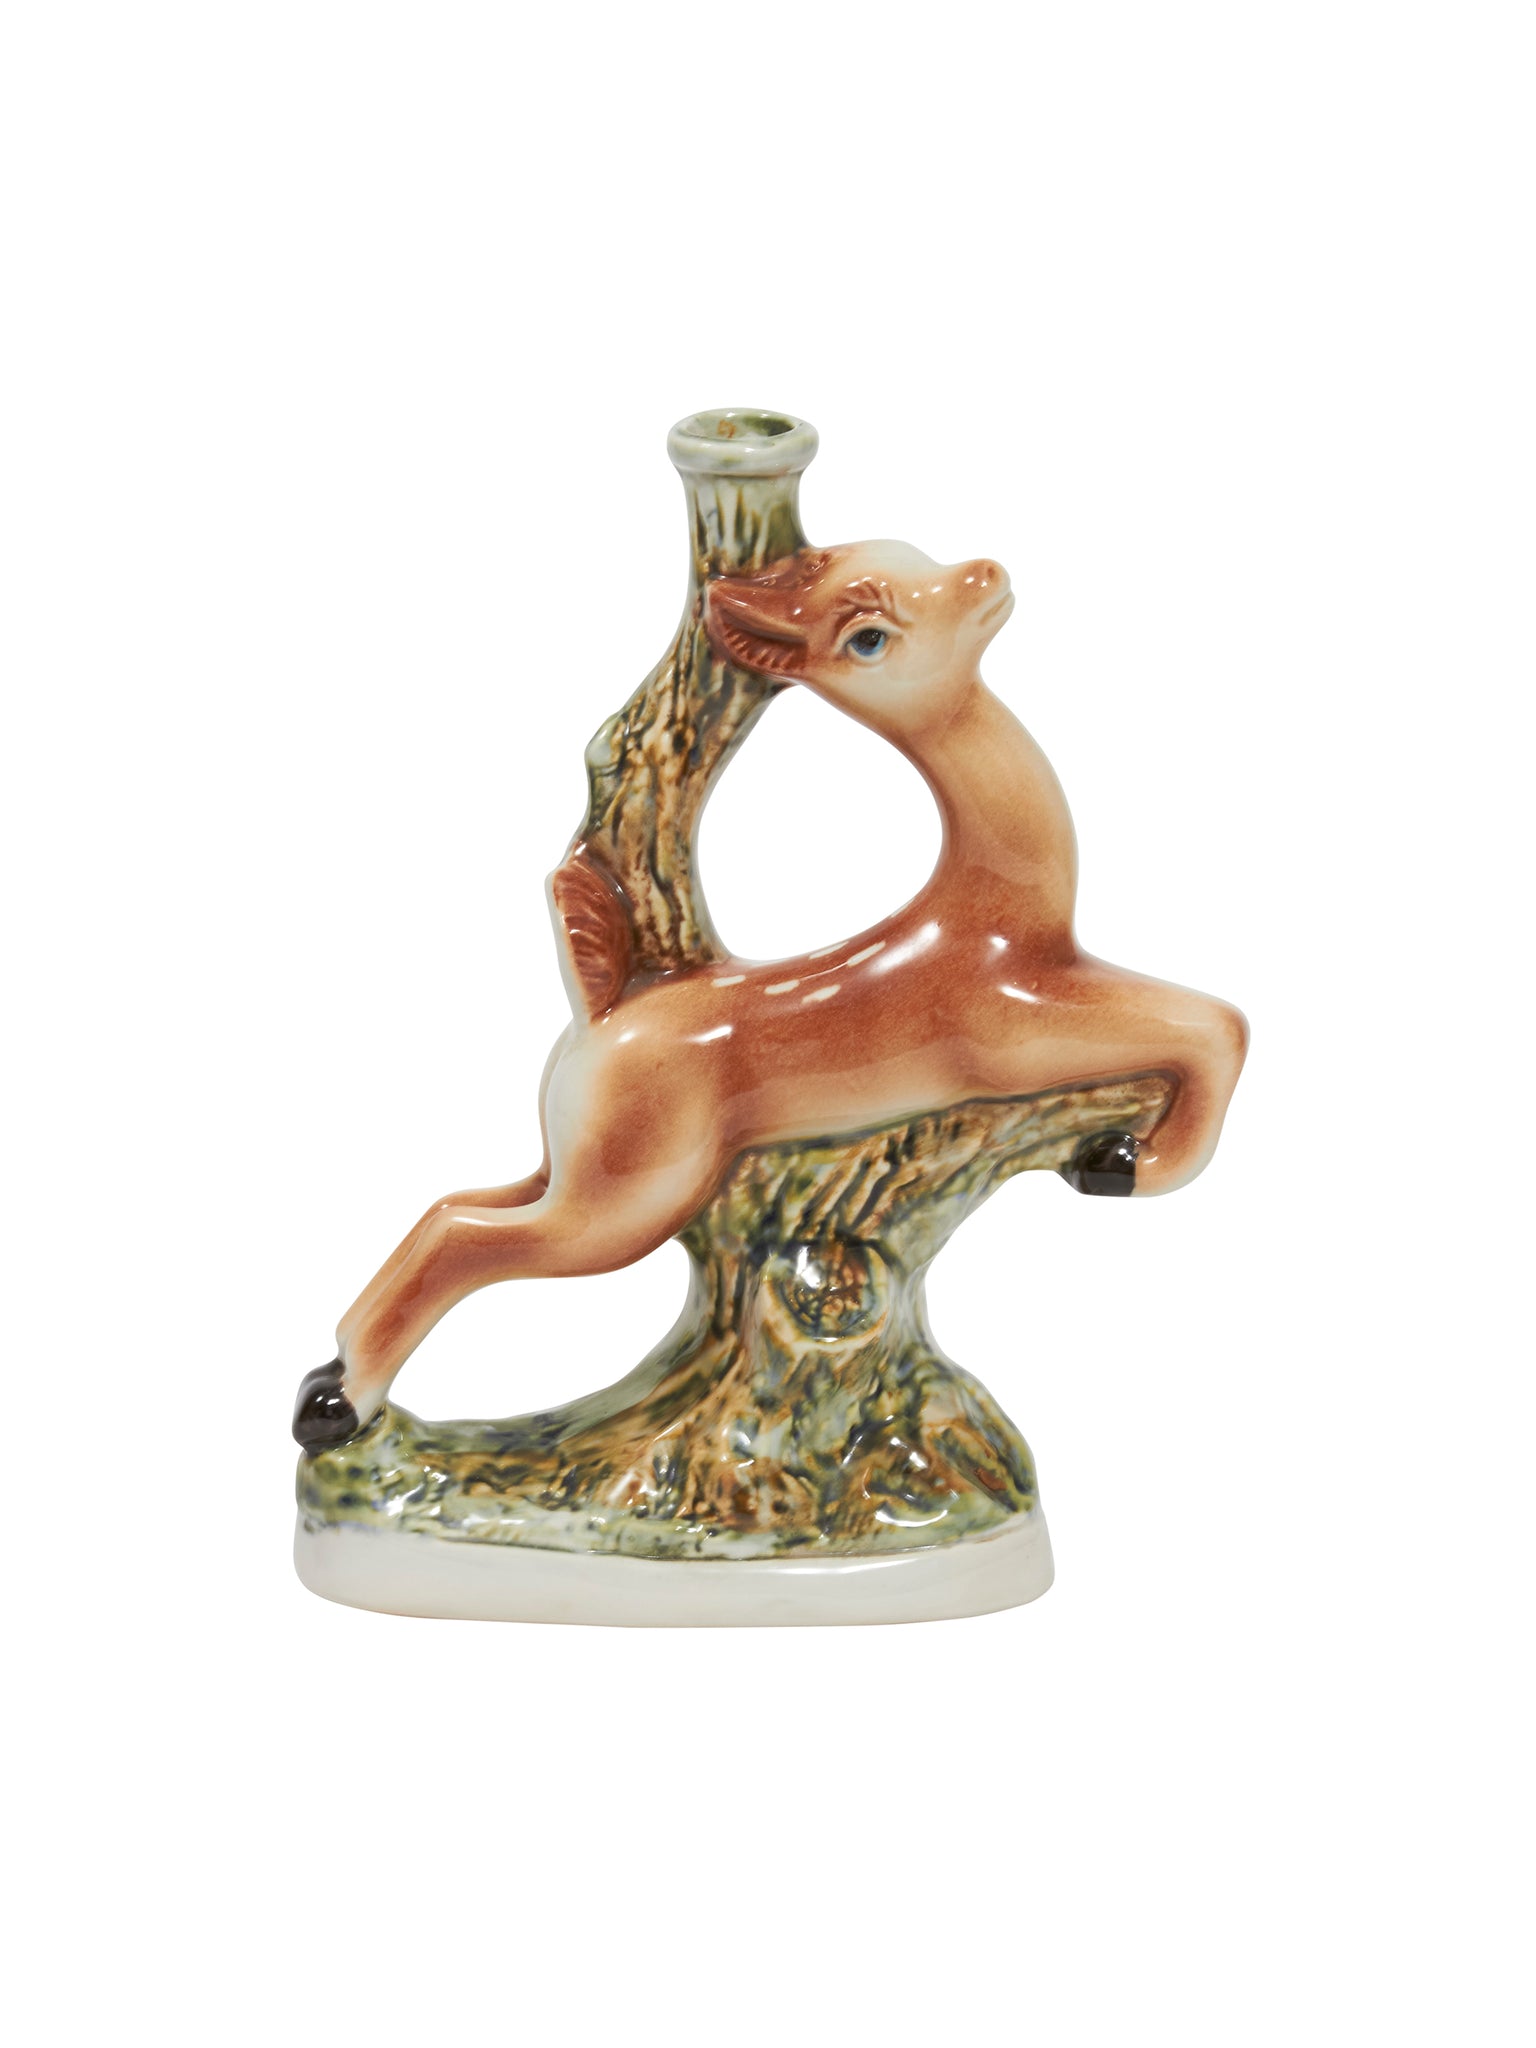 Vintage 1960s Leaping Deer Ceramic Decanter Style One Weston Table